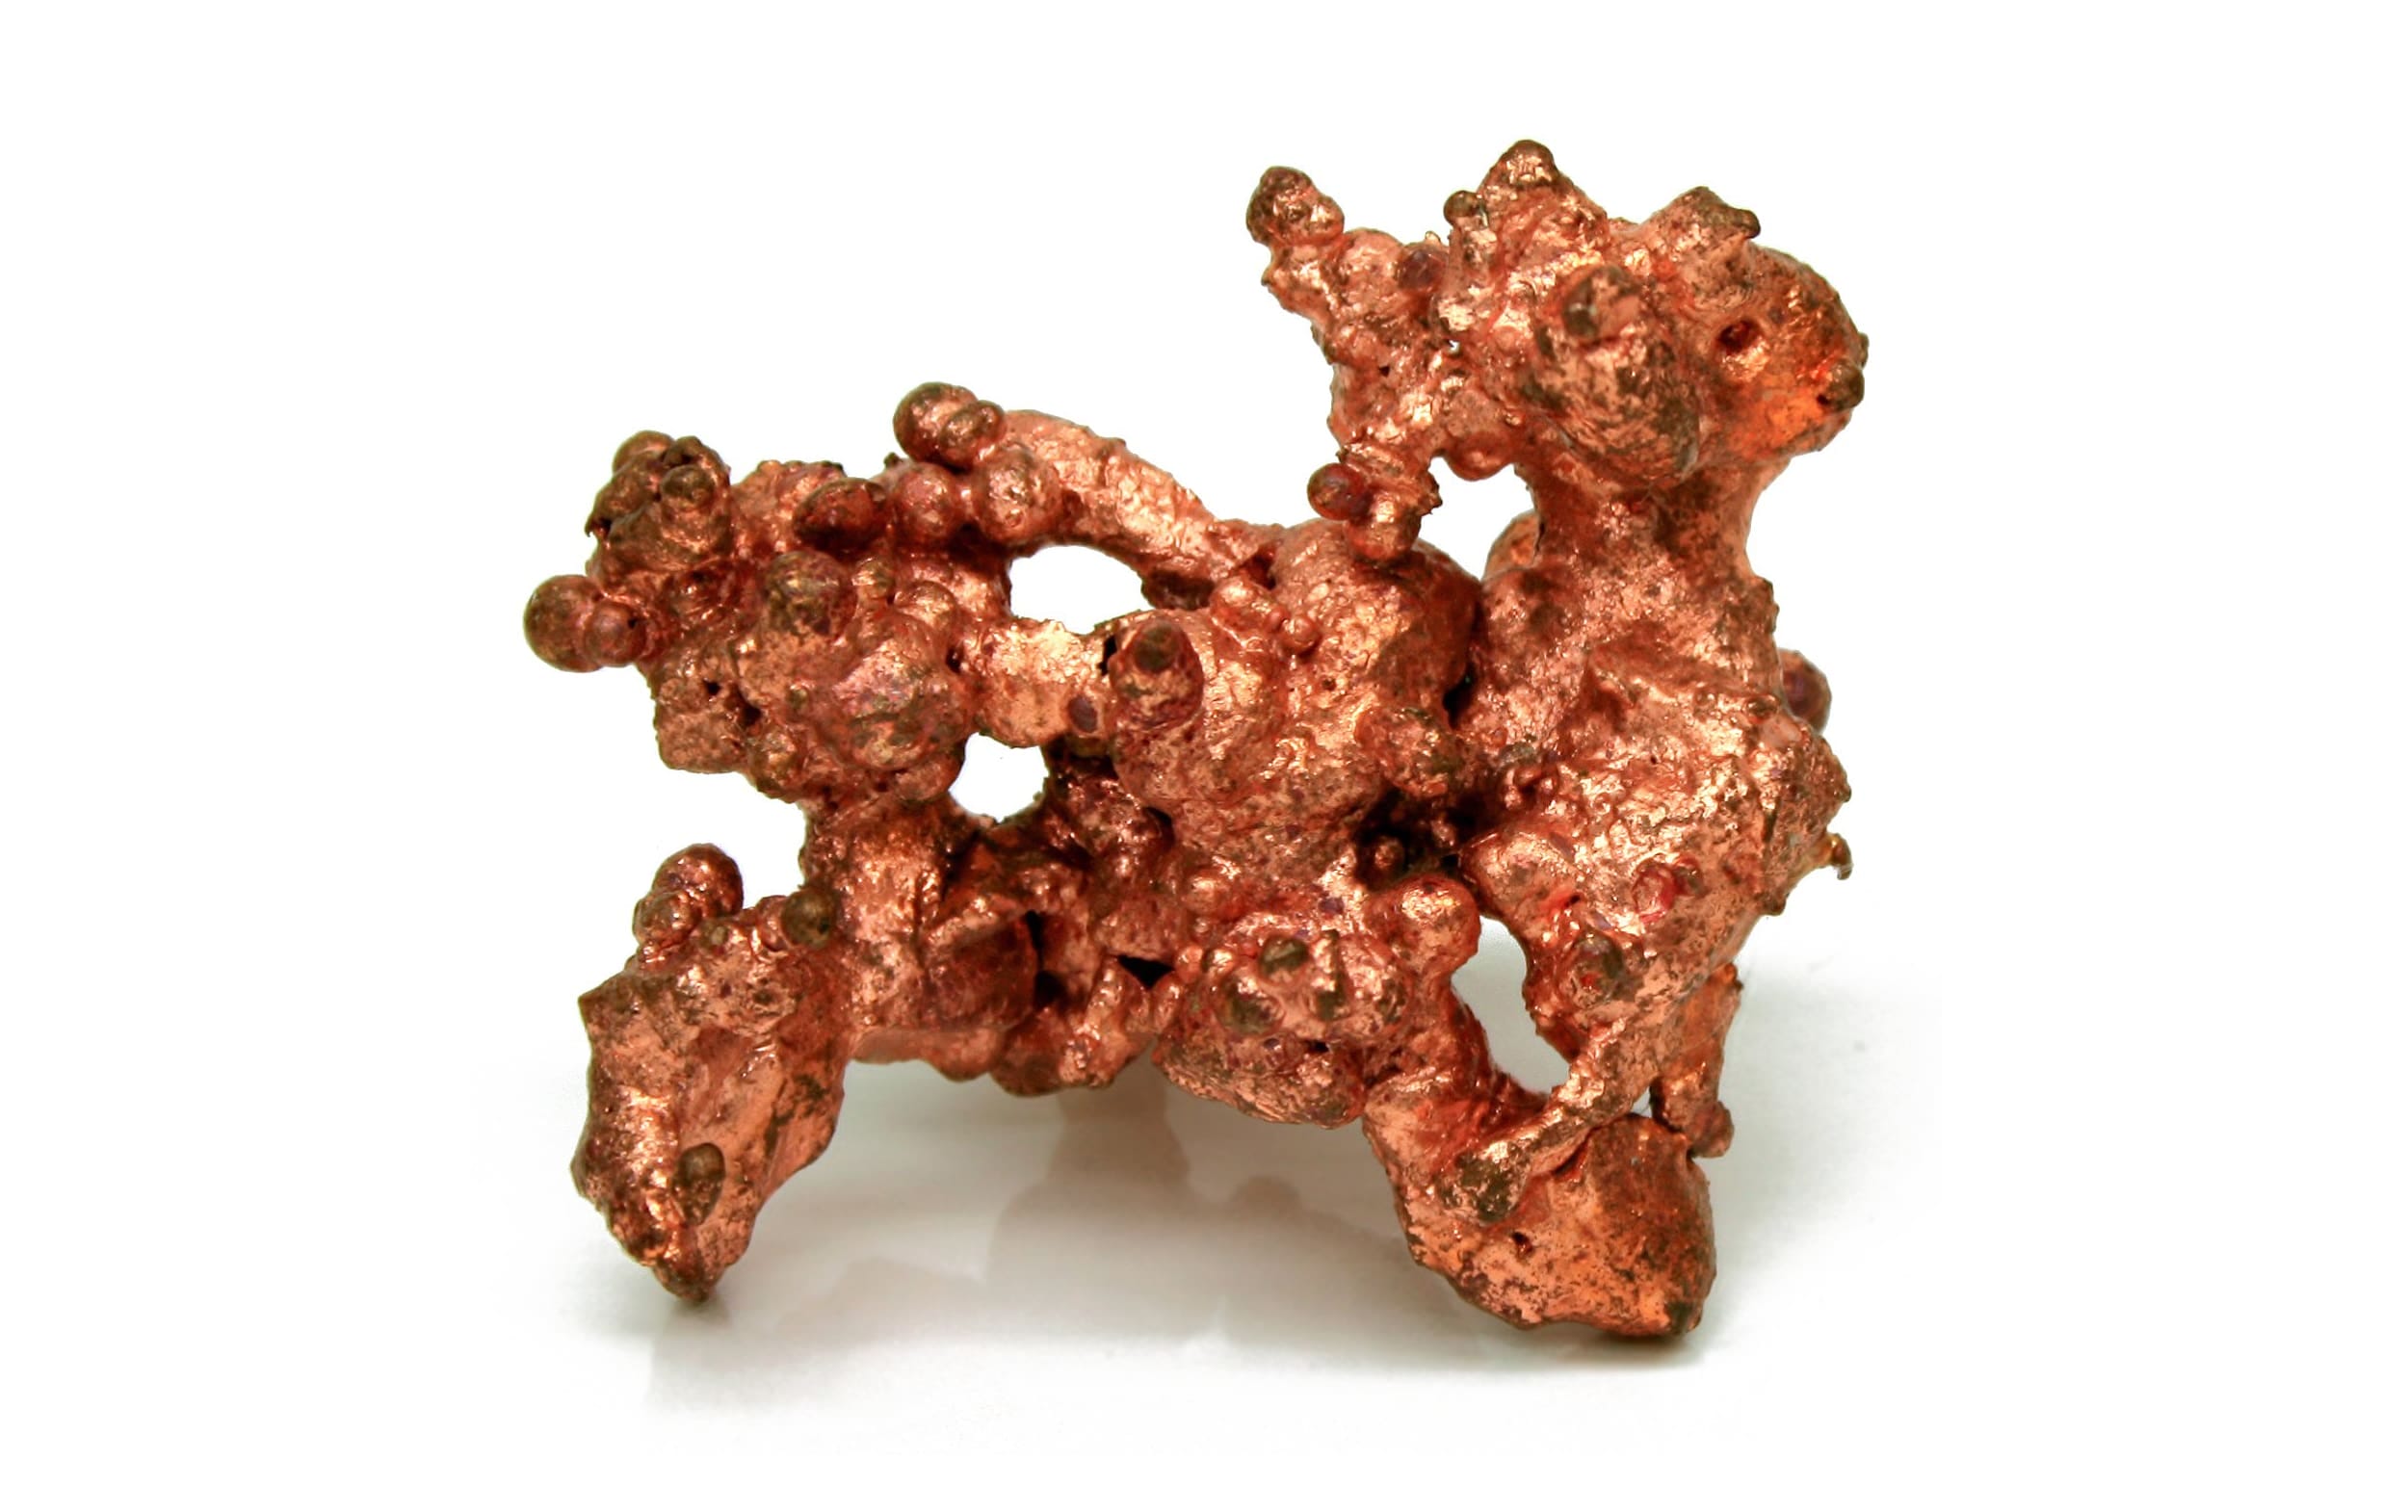 Macro image of native copper, about 1 ½ inches (4 cm) in size.